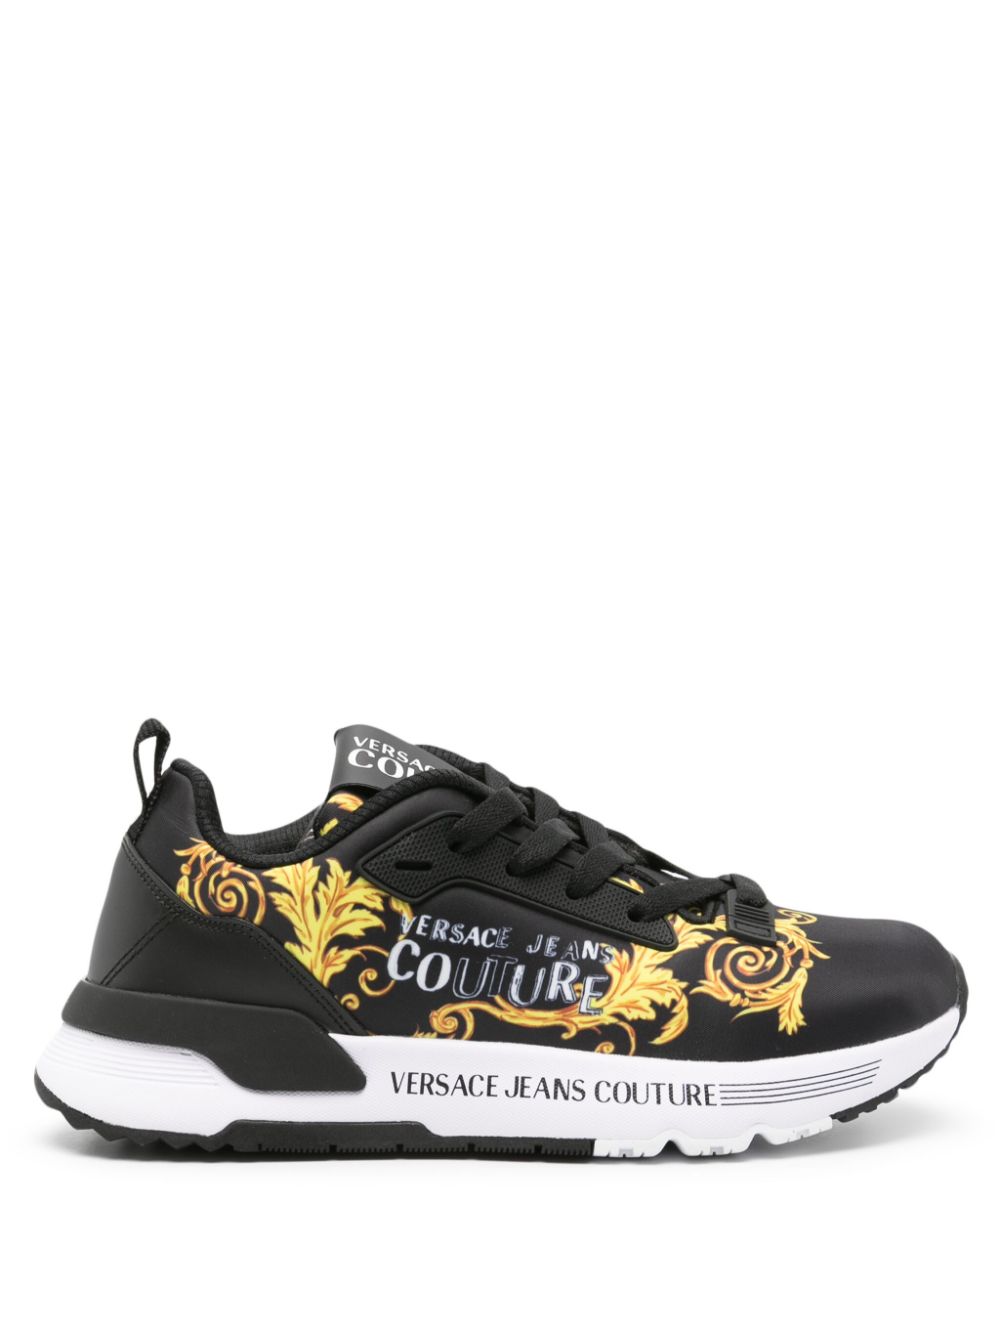 Versace Jeans Couture Dynamic Barocco-print sneakers - Black von Versace Jeans Couture